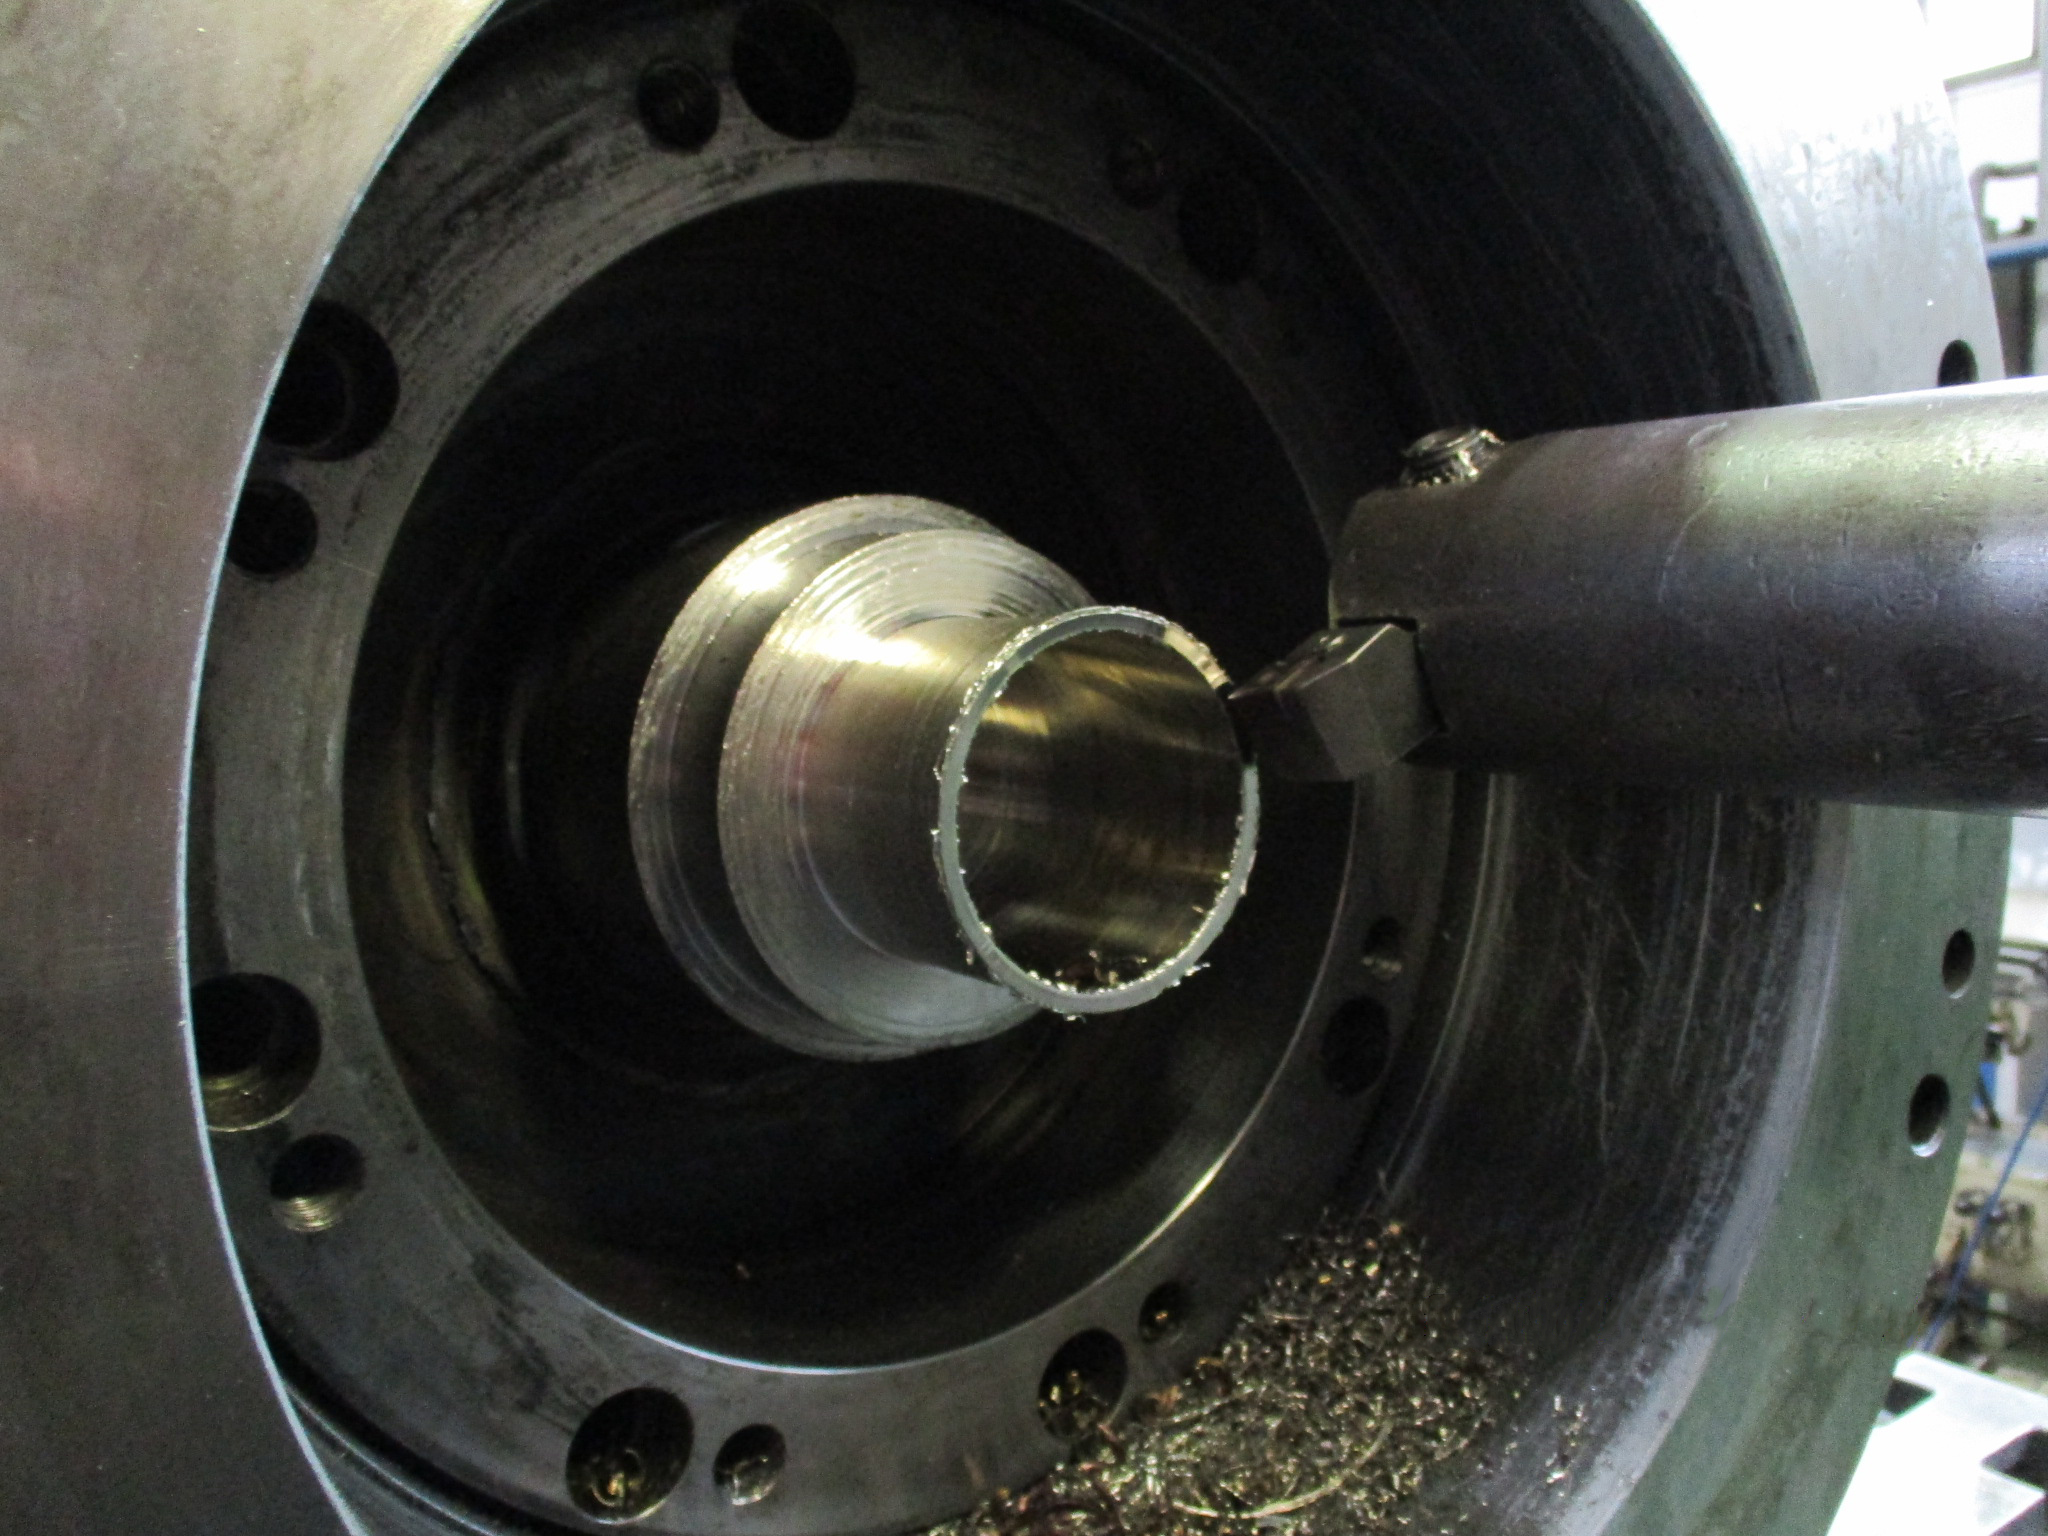 The initial investigation found that the balance piston and sleeve were welded together and this would require the shaft to be cut off and drilled out to separate the parts